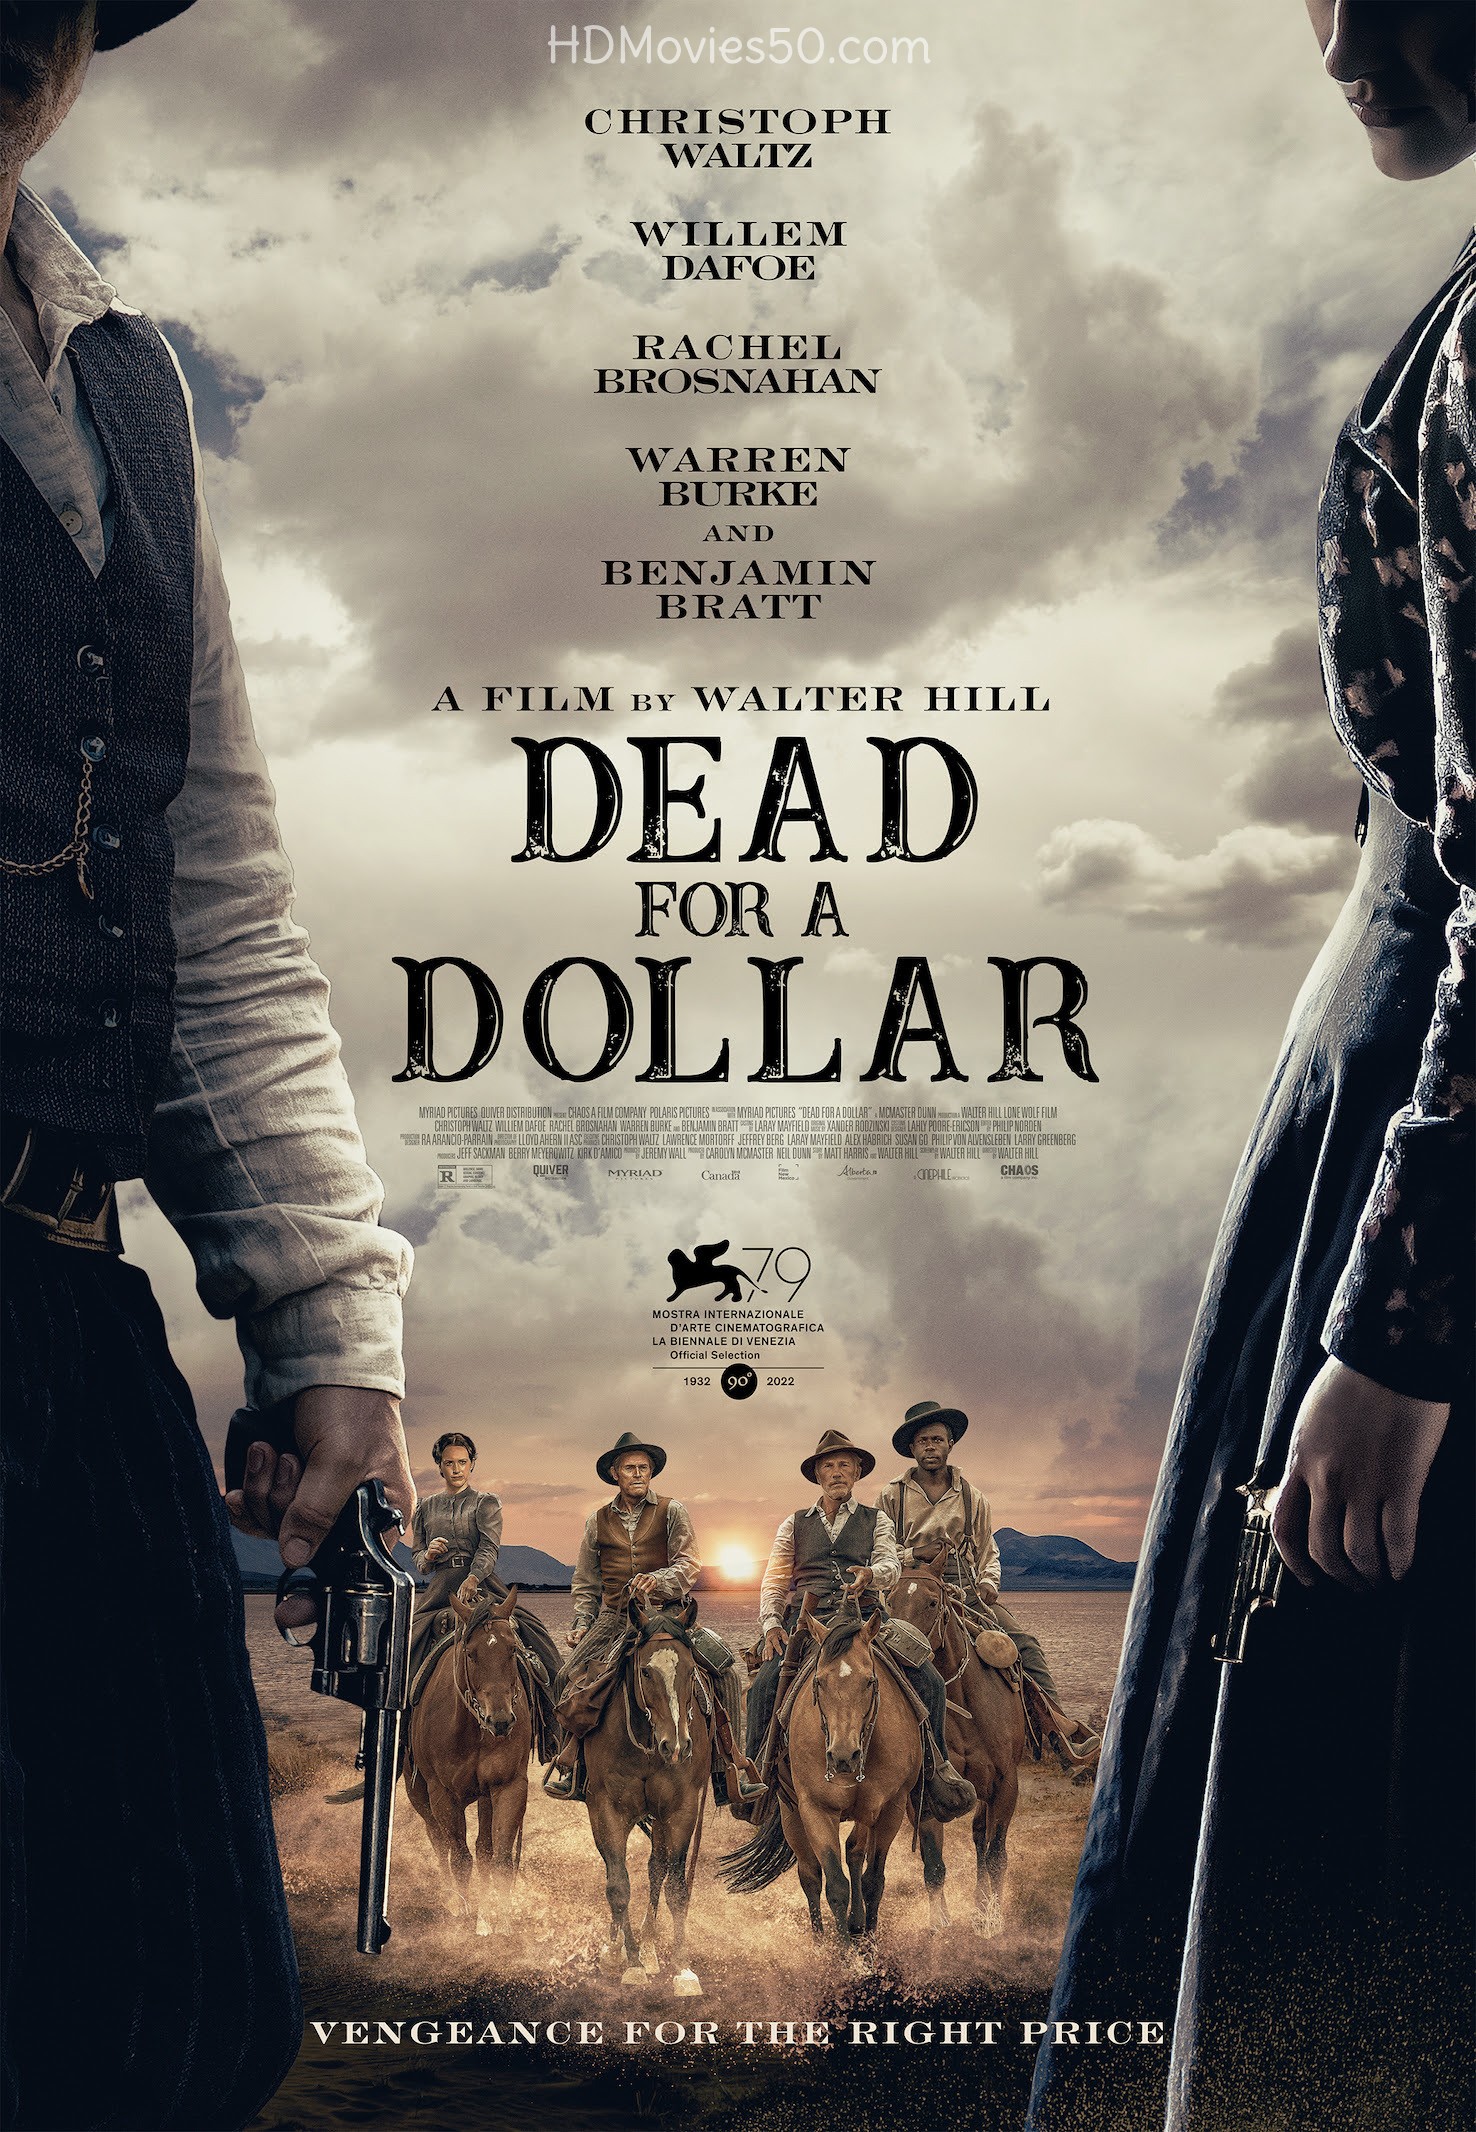 Dead for a Dollar 2022 English 1080p HDRip 1.4GB Download